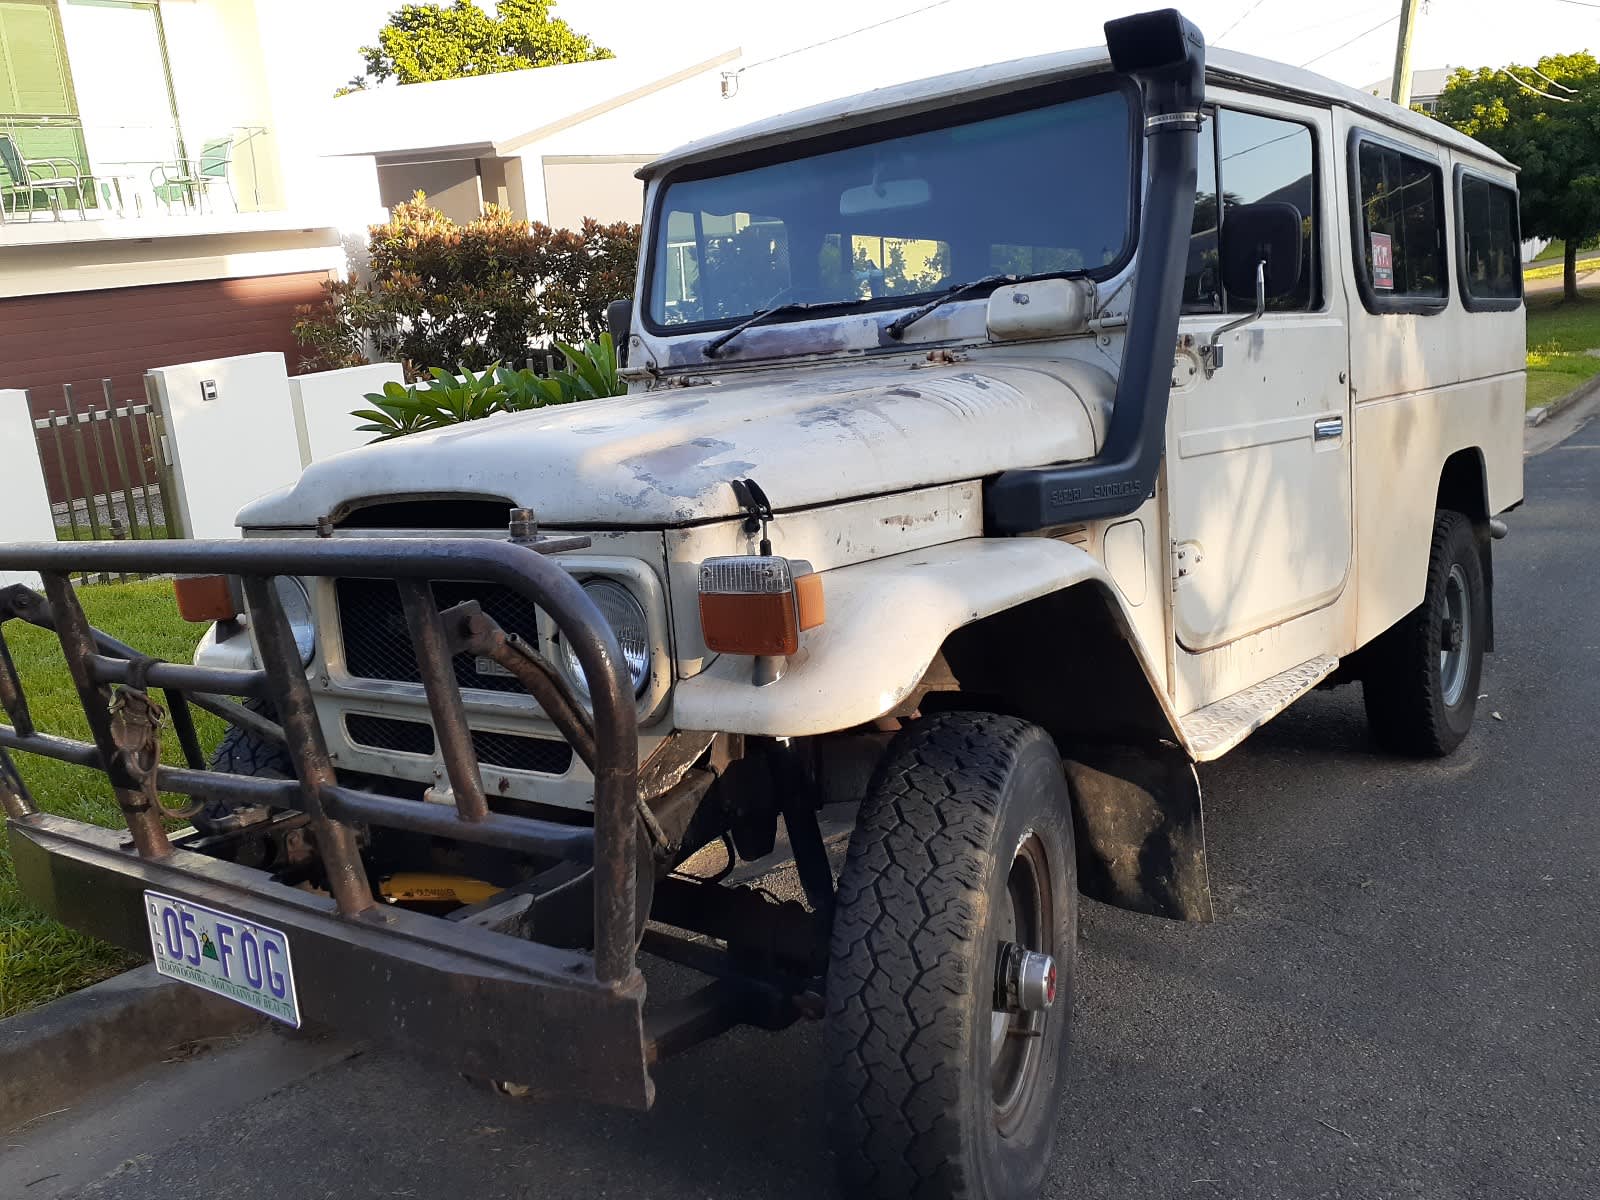 79 series landcruiser, Buy New and Used Cars in Toowoomba Region, QLD